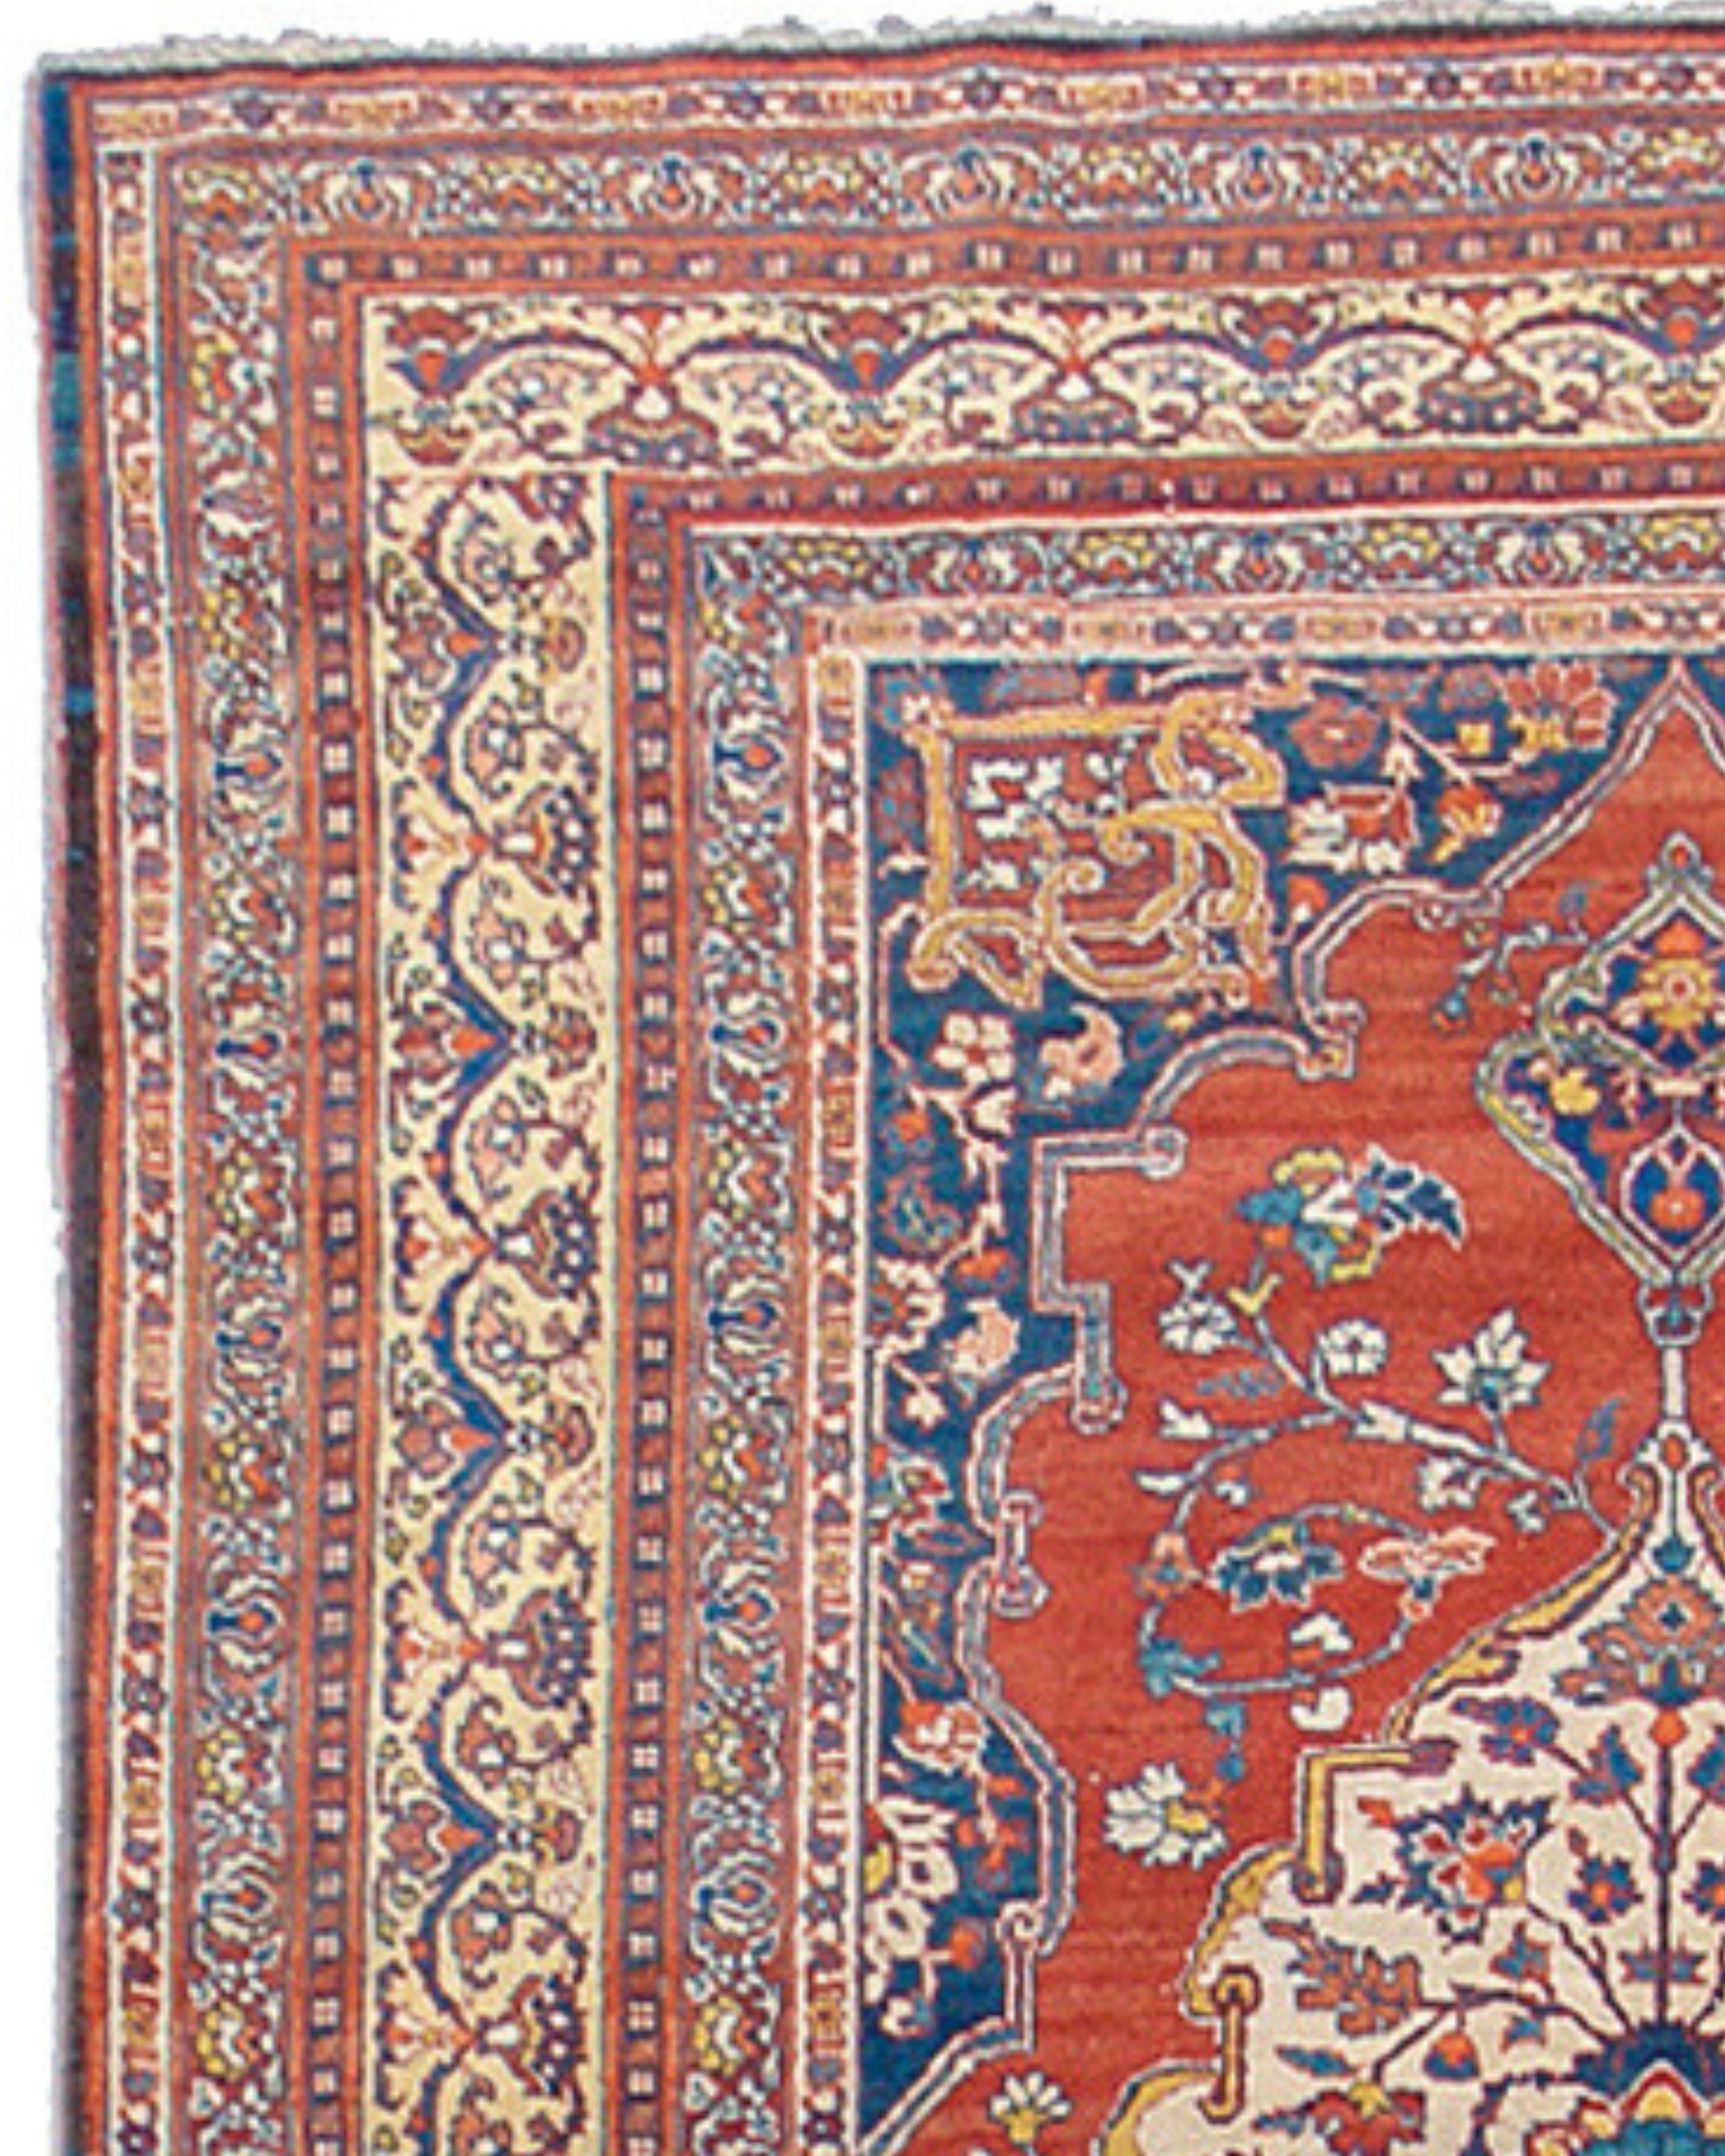 Hand-Woven Antique Persian Tabriz Rug, 19th Century For Sale